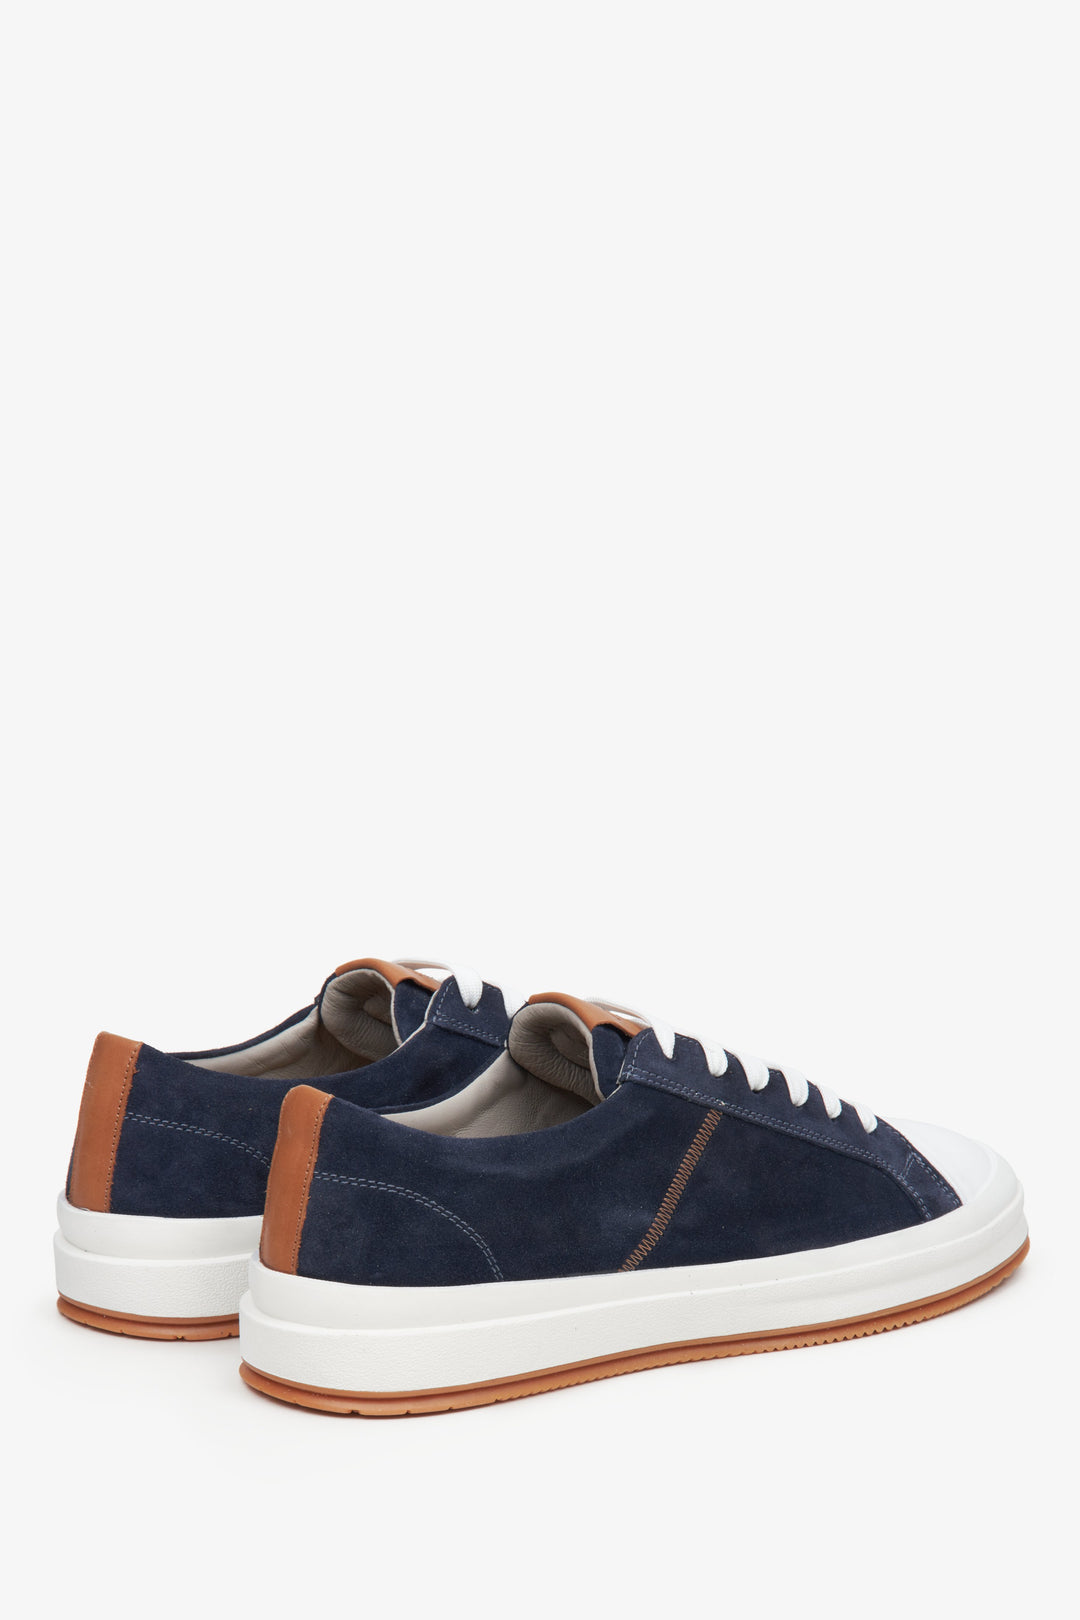 Navy blue men's sneakers made of genuine velour - close-up on the heel and side line of the shoes.